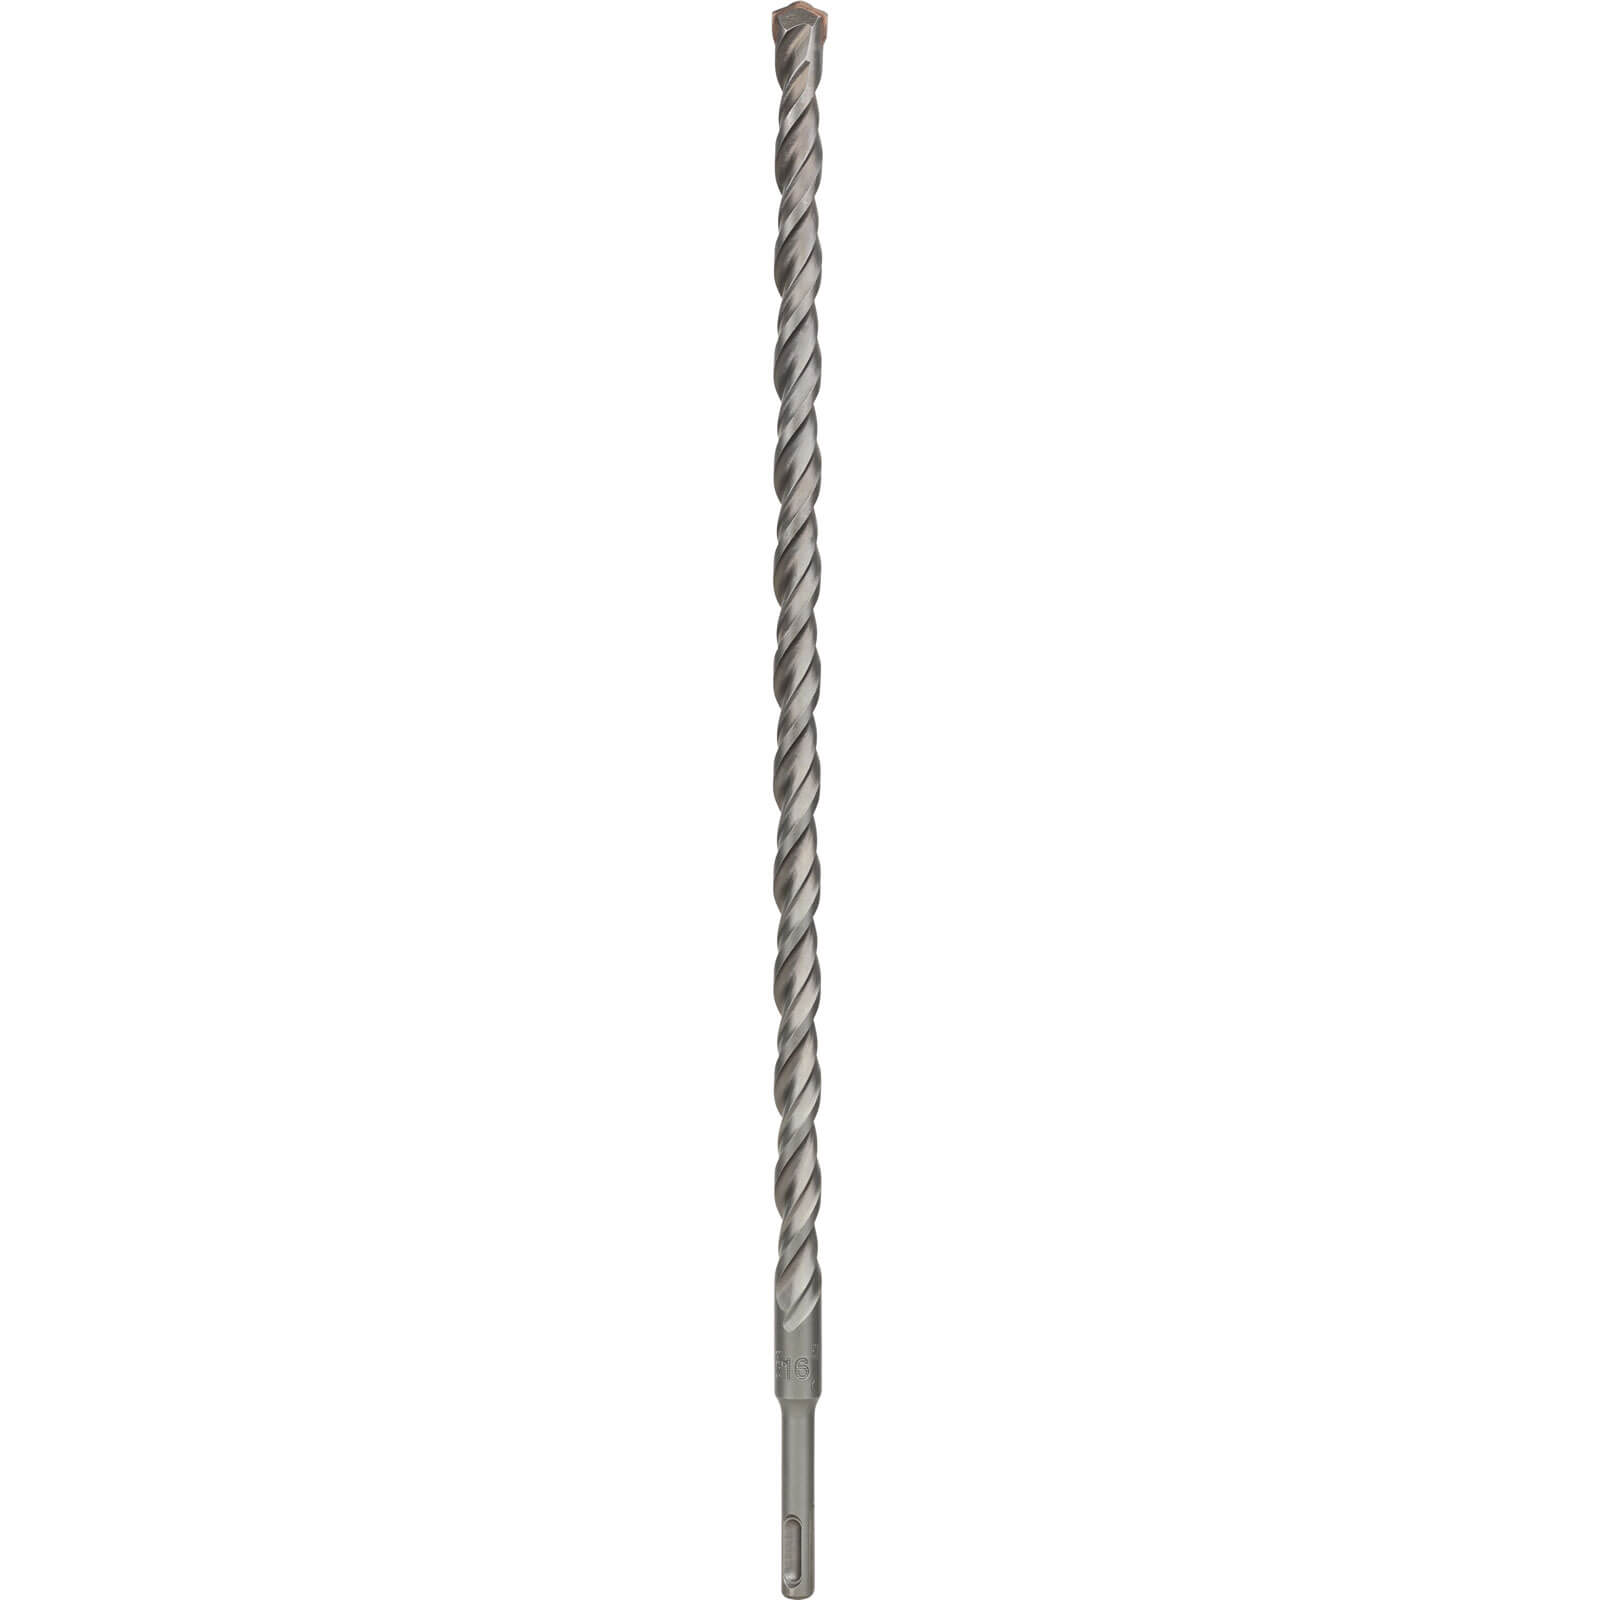 Image of Bosch Series 3 SDS Plus Masonry Drill Bit 16mm 460mm Pack of 1